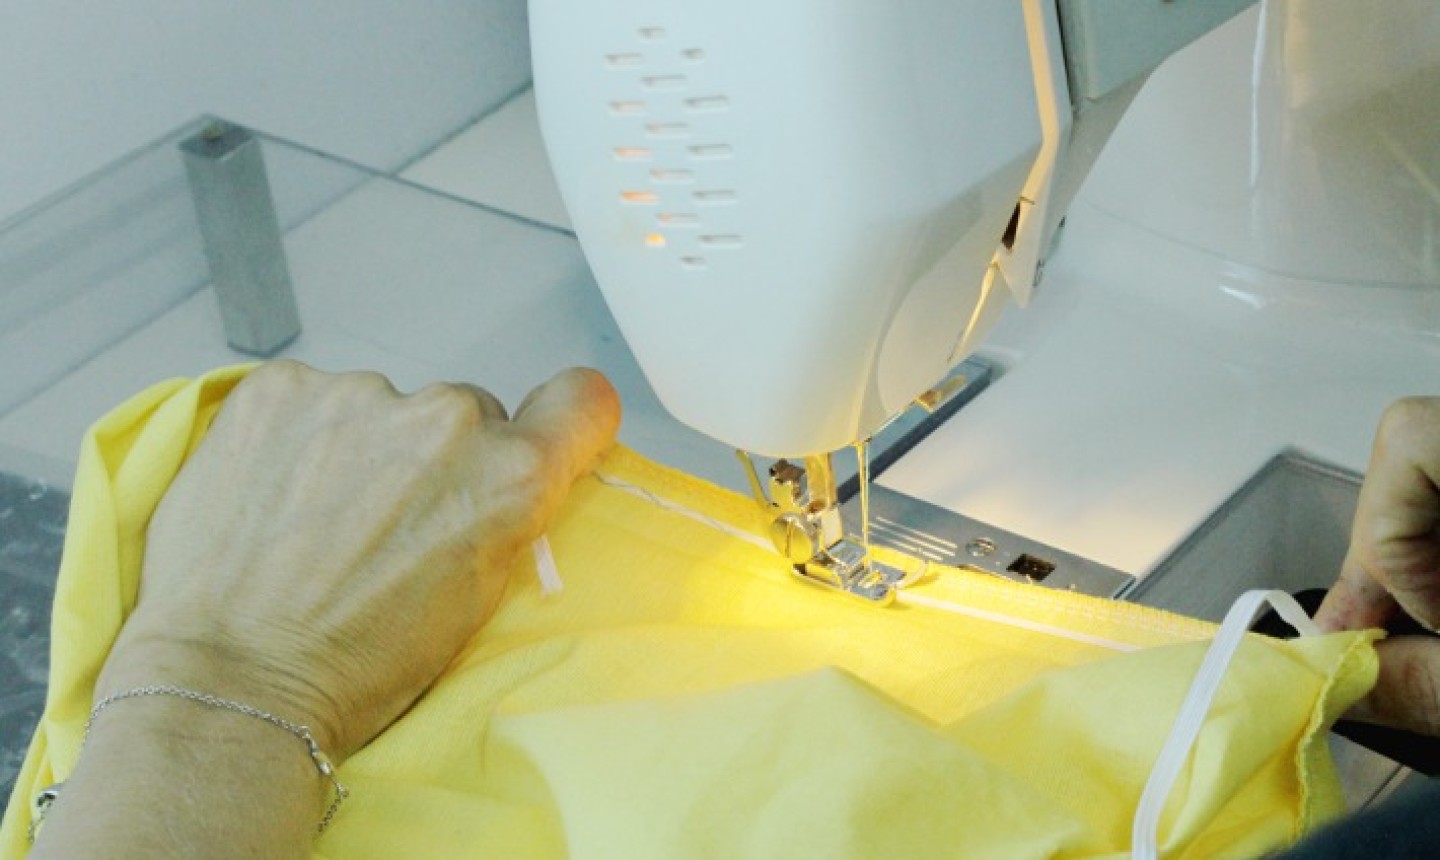 Sewing machine with yellow fabric